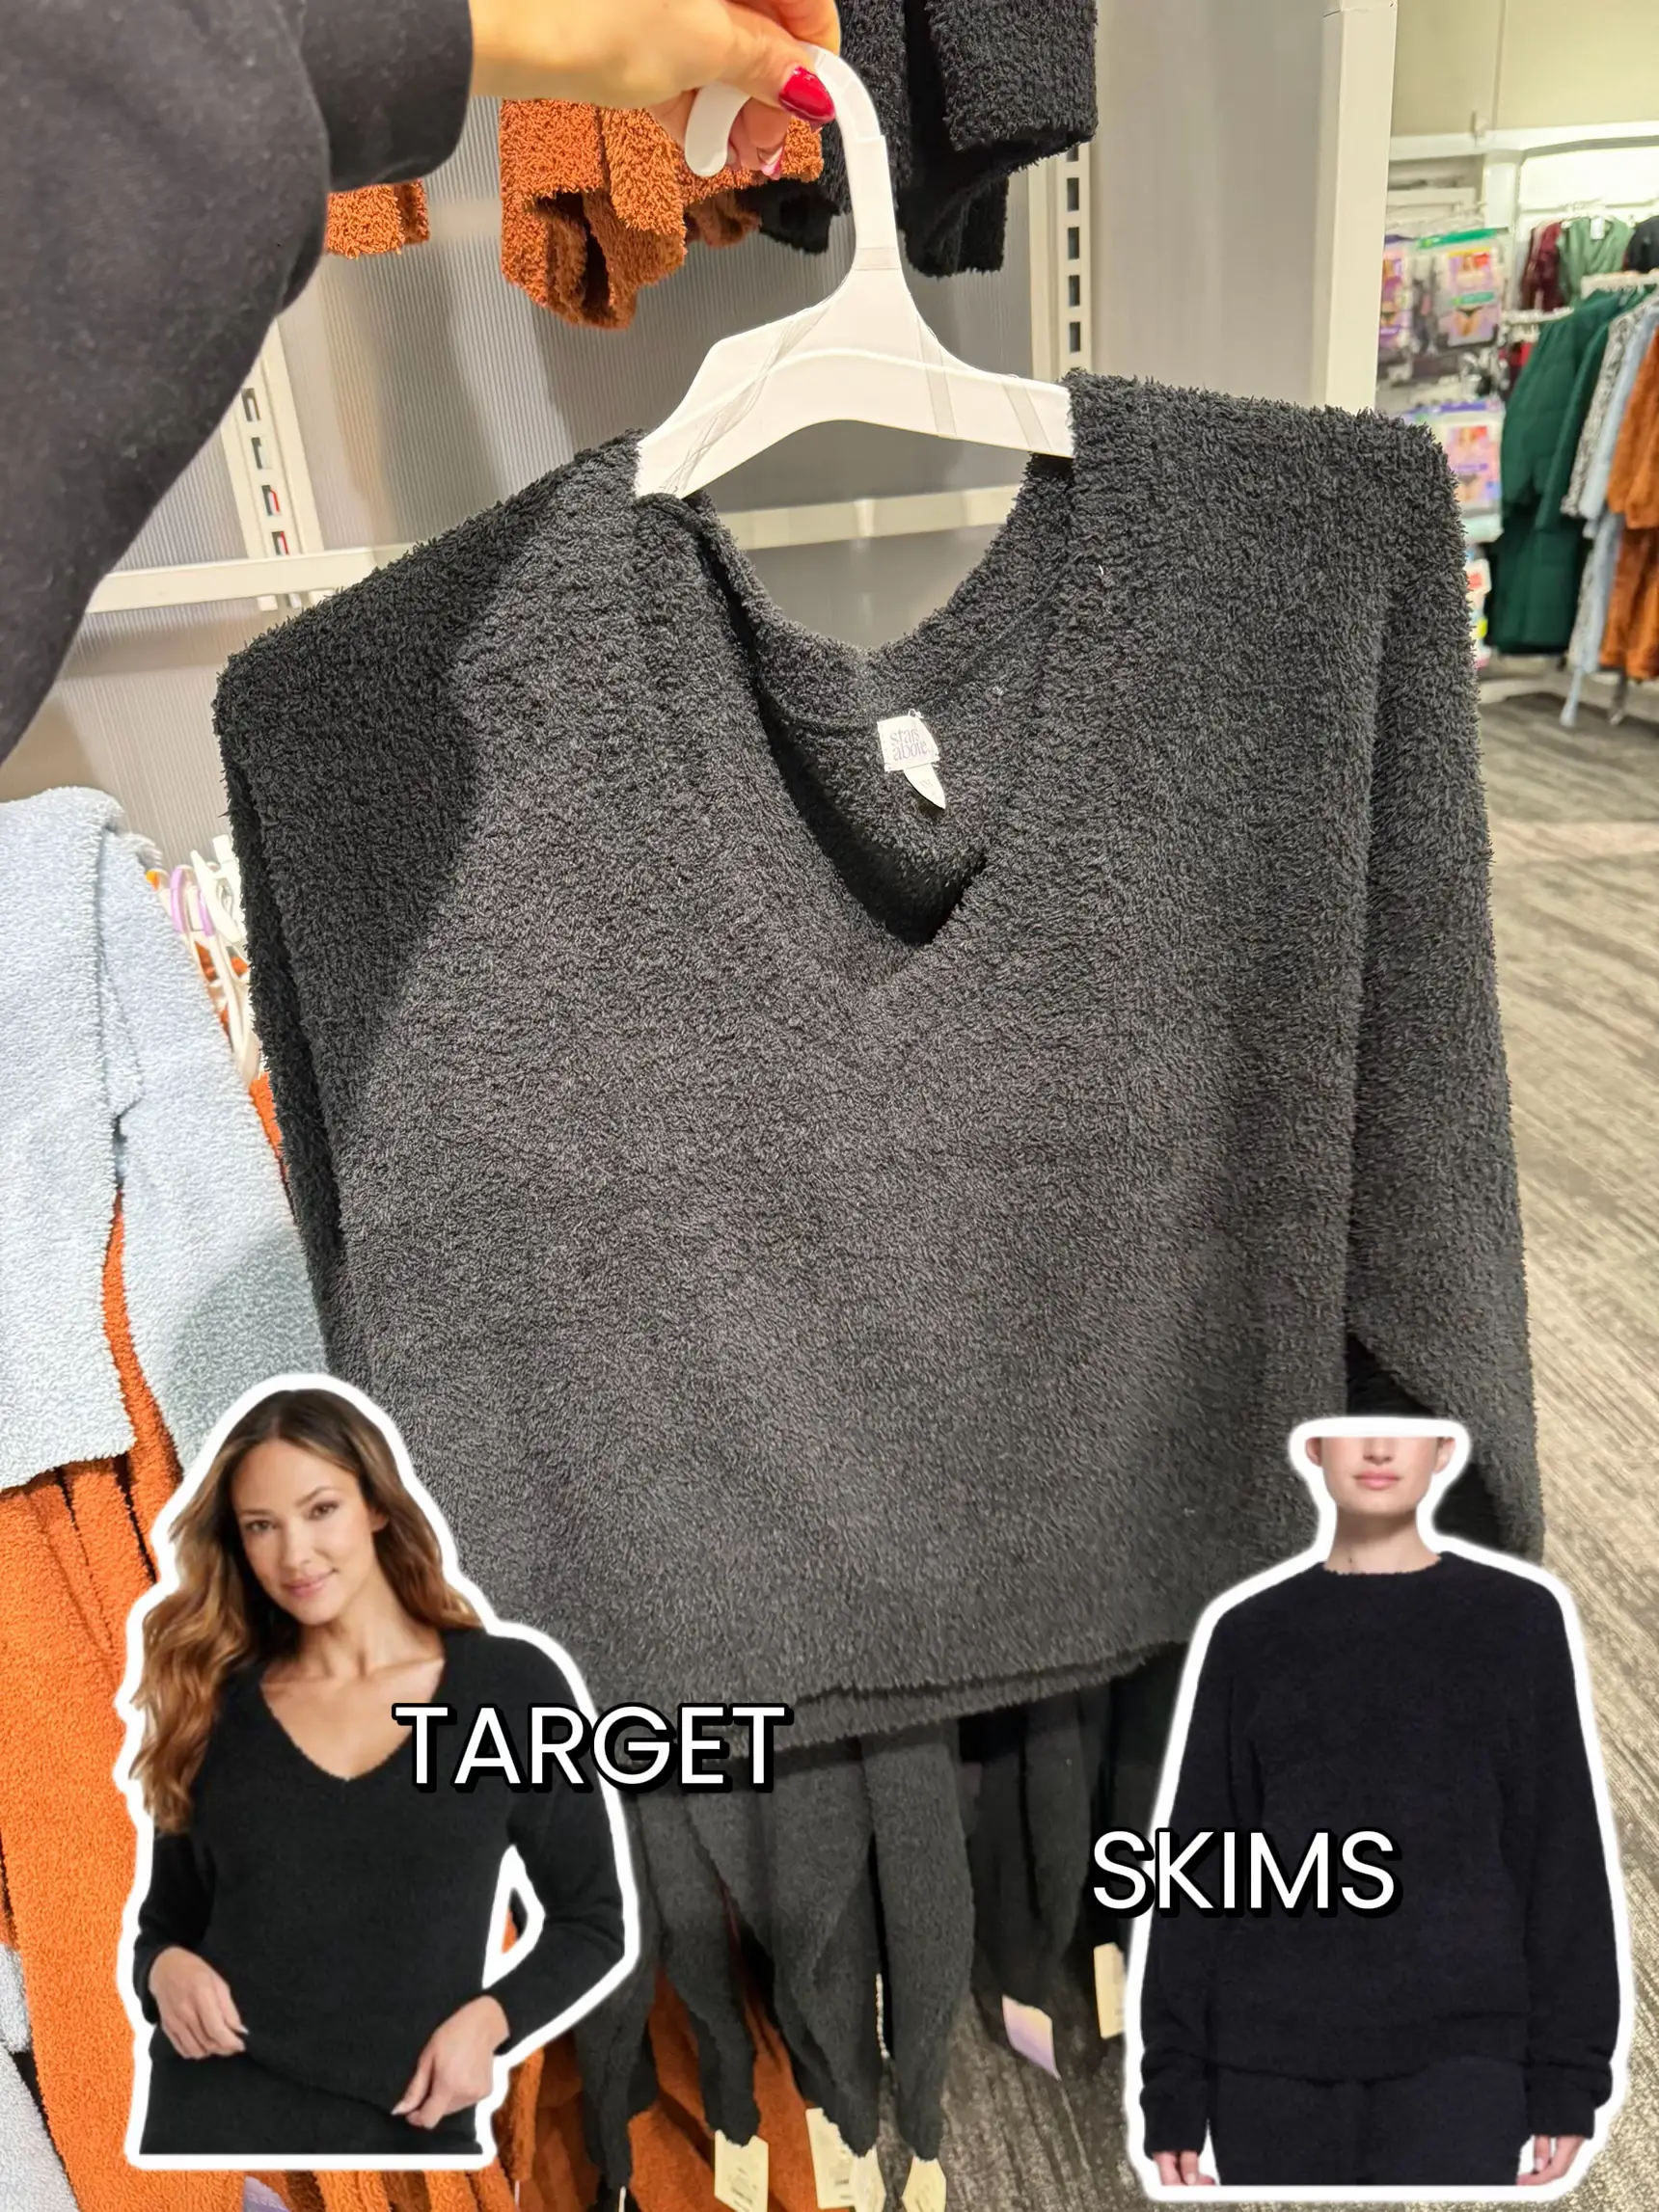 skims dupes at Target🫶 This loungewear collection at Target is such a  great dupe option to skims' fuzzy knits! Target currently off